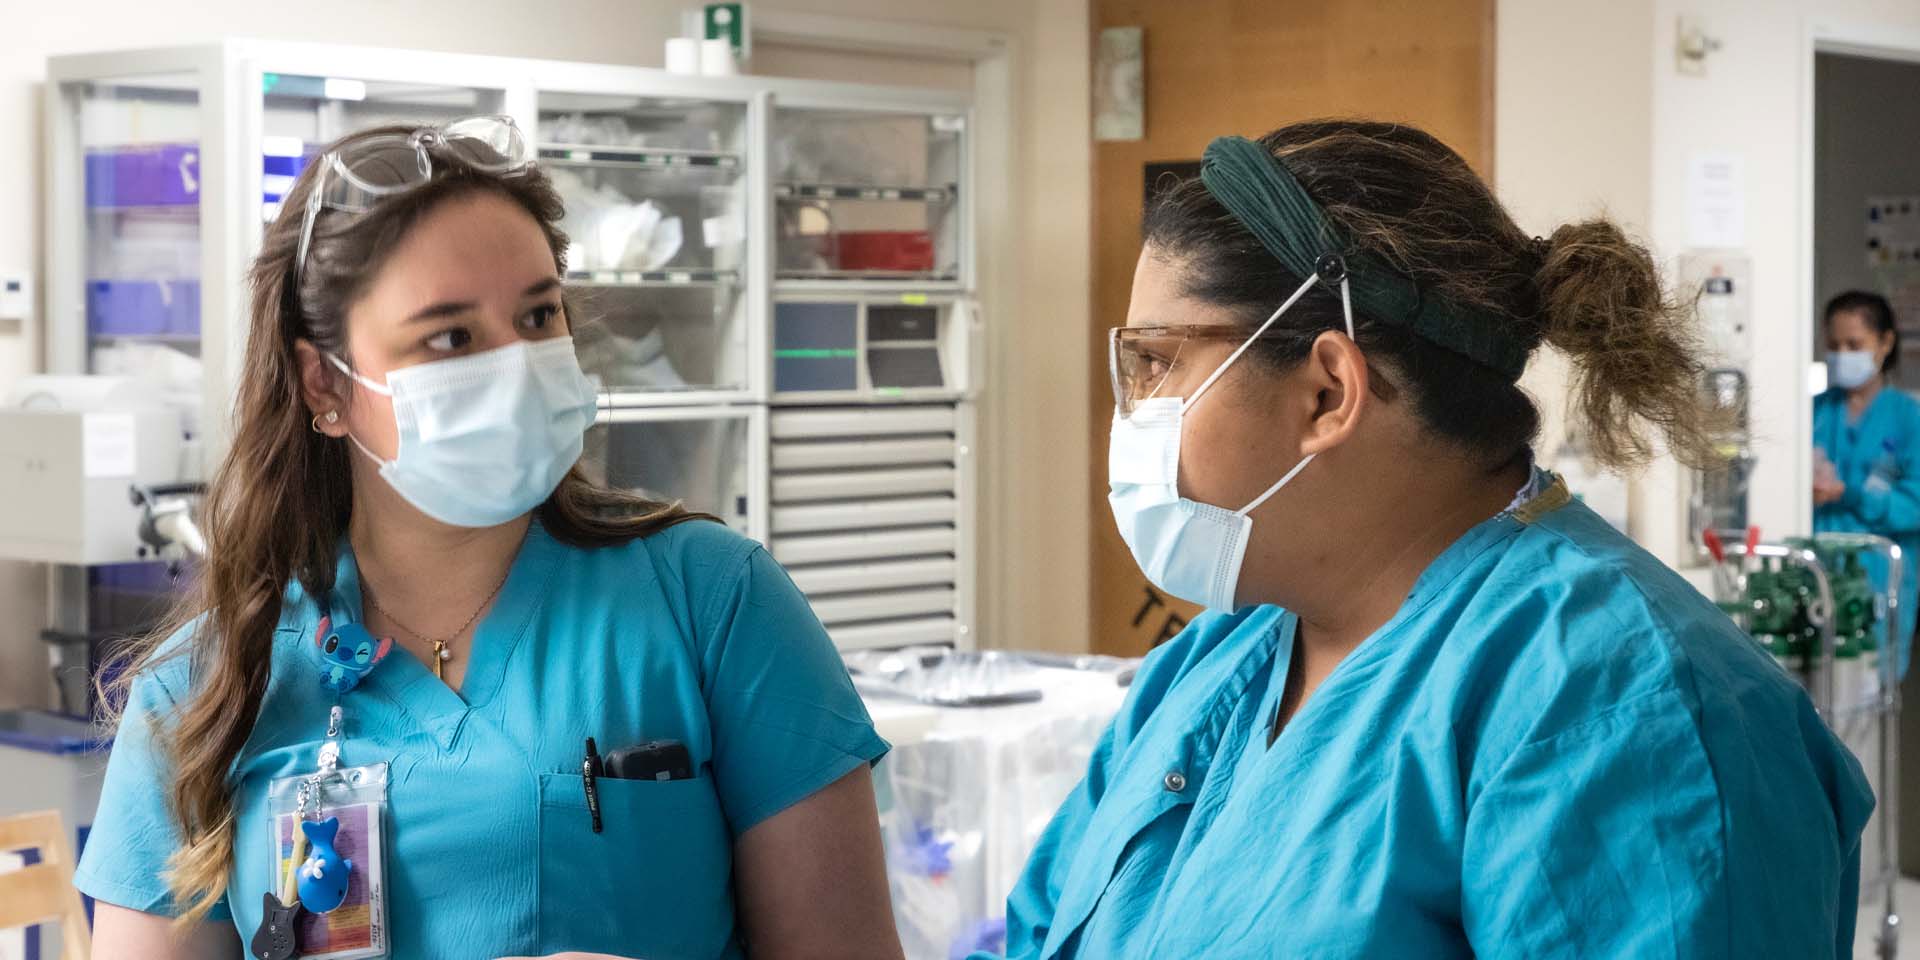 Two nurses in blue scrubs and surgical masks